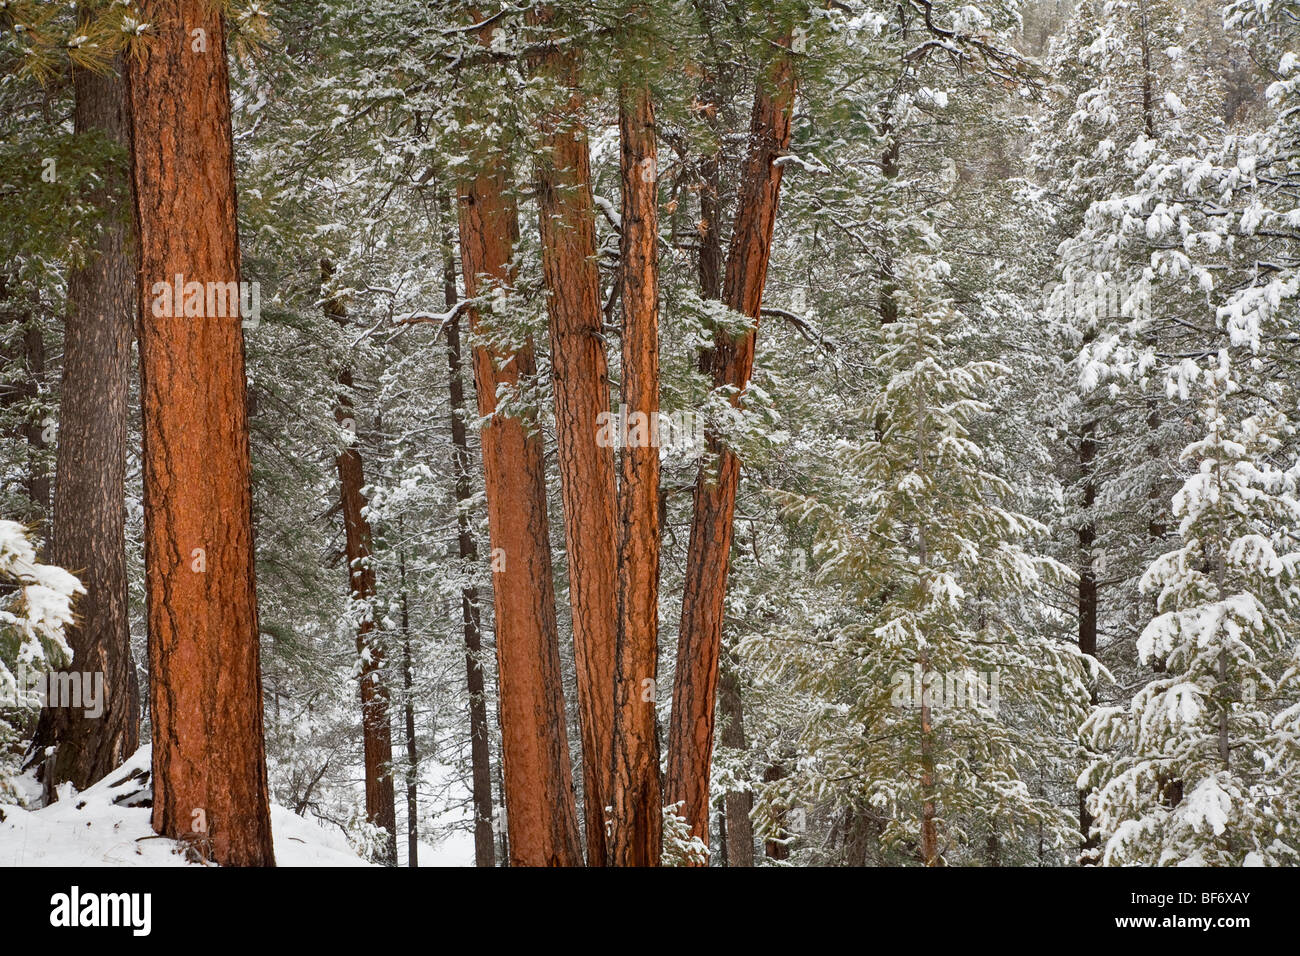 Snowy forest of ponderosa pines and Douglas Fir in Fay Canyon area of Coconino National Forest, Flagstaff, Arizona, USA Stock Photo